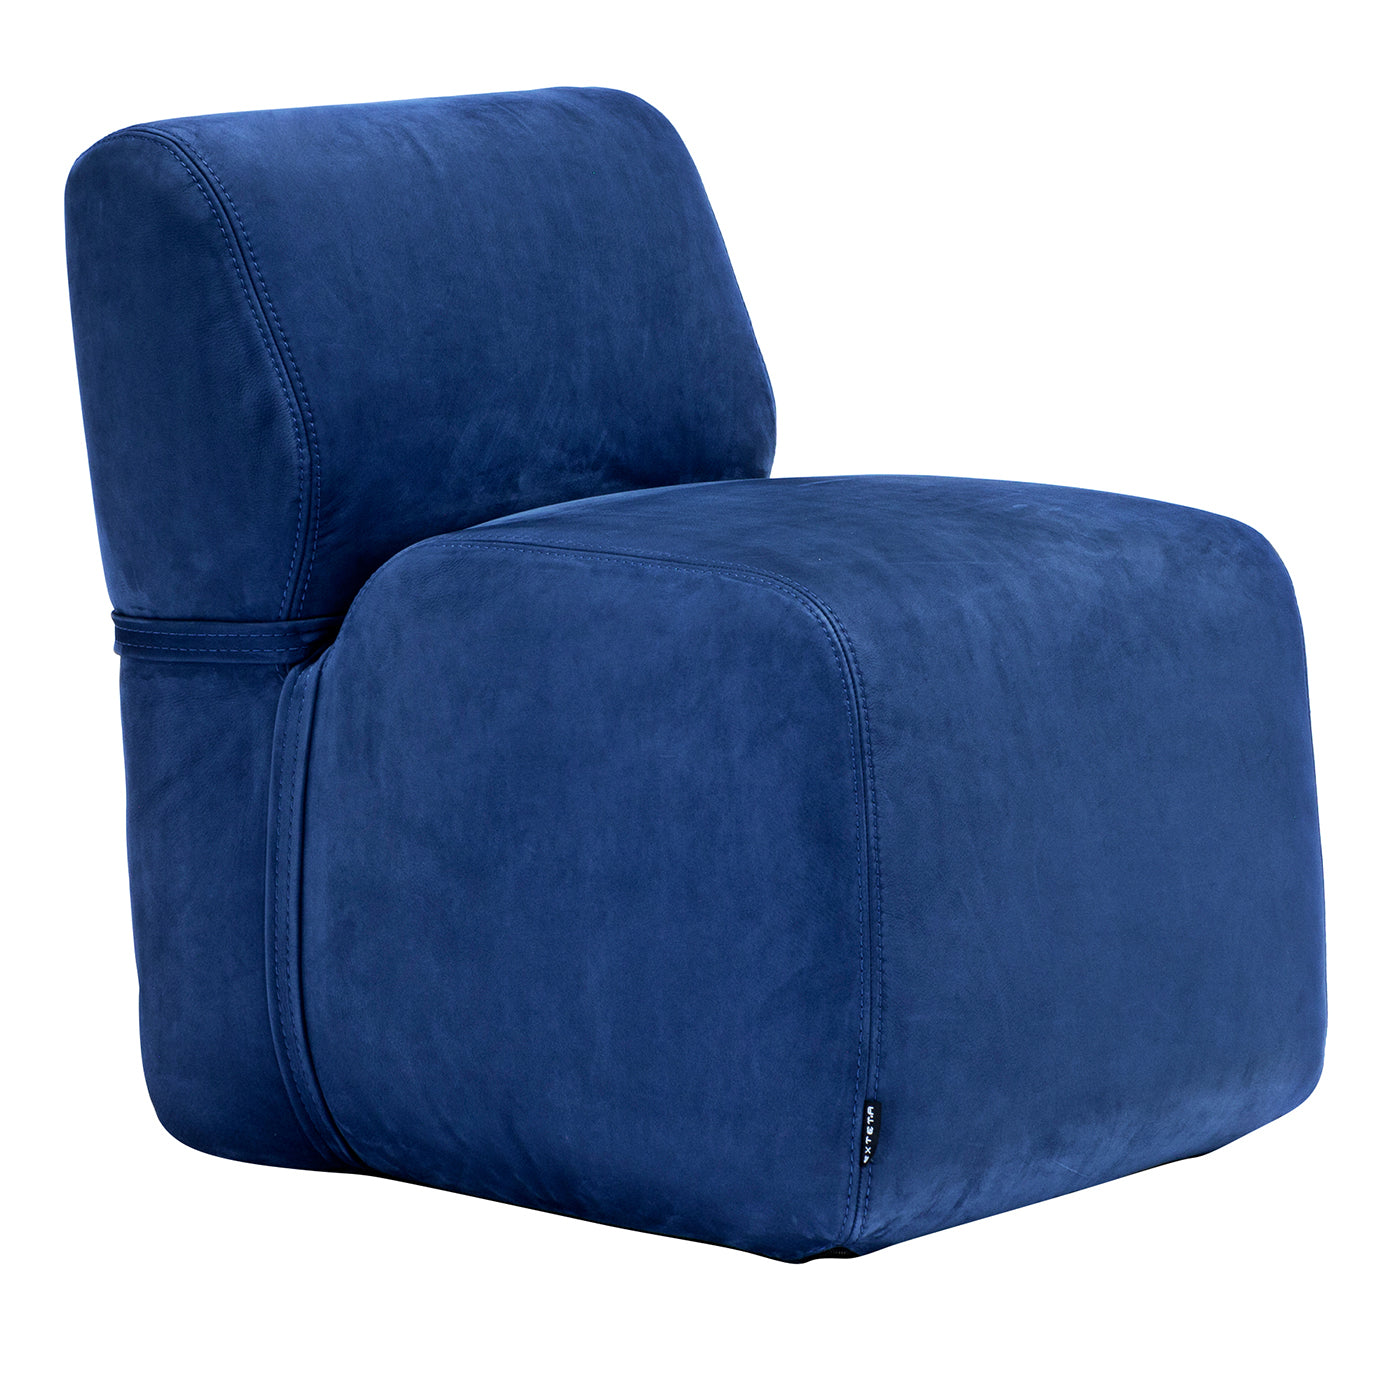 Soft Small Blue Lounge Chair - Main view